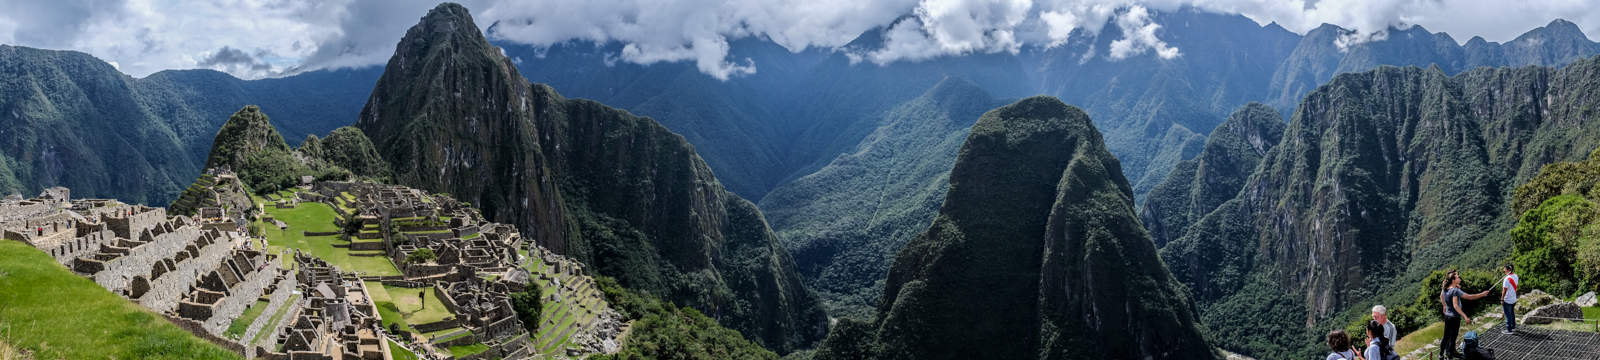 The stone Inca ruins of Machu Picchu set within a the mountains of the Sacred Valley in Peru. 